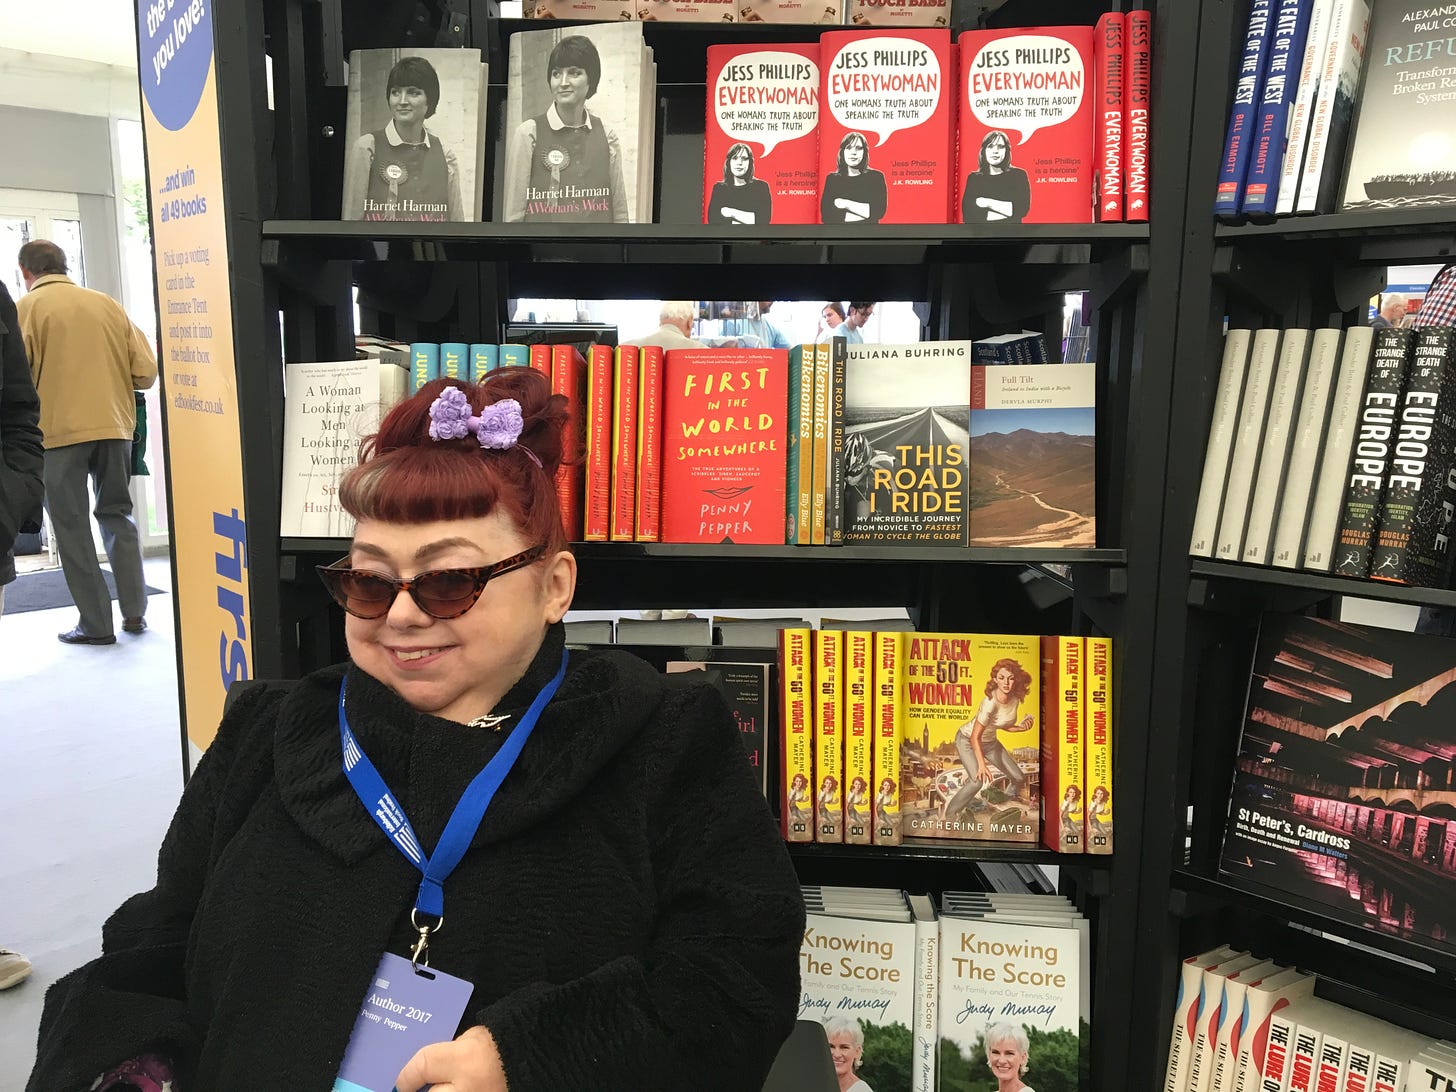 Penny sits smiling in her wheelchair in front of books in a bookshop. There are many rows of shelves with books, and different colours on their front covers. To the right of Penny and behind her head are copies of her memoir, First in the World Somewhere, a red book with yellow lettering. Penny wears black cat’s eyes sunglasses, a black jacket with a purple bow in her red hair. As an author, she wears a blue lanyard (an identity tag), around the neck for the Edinburgh International Book Fair 2017.